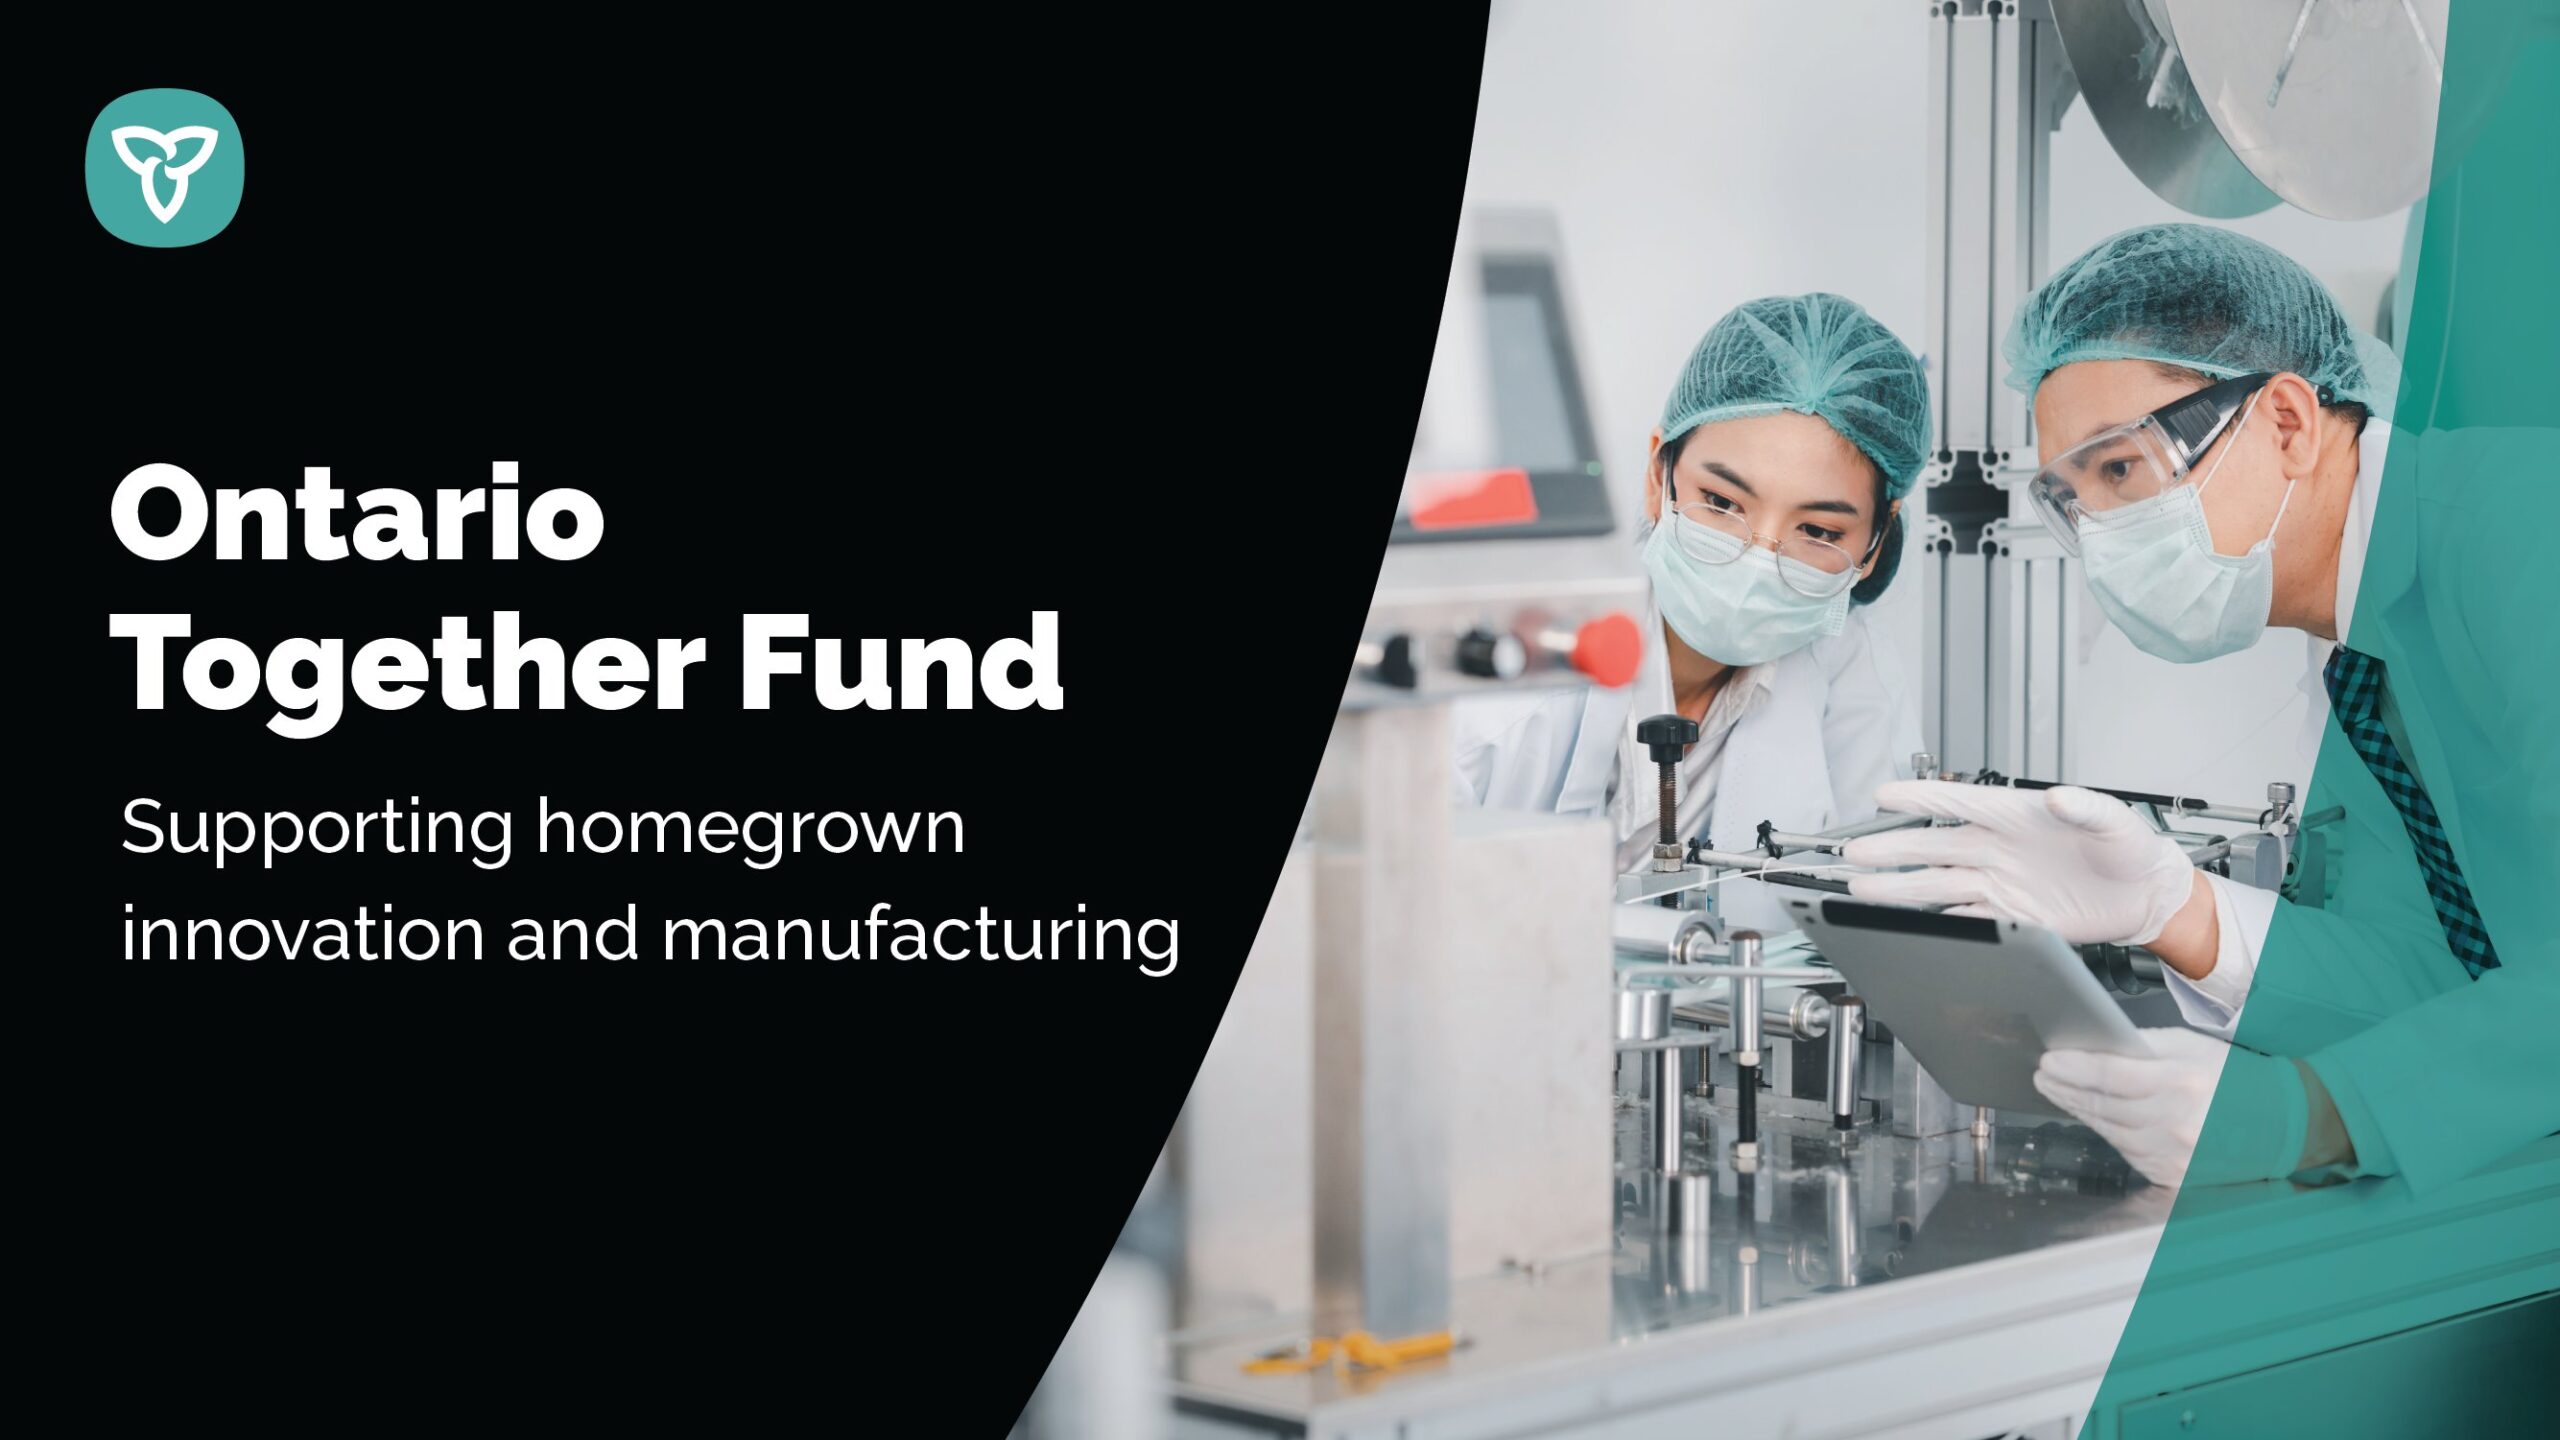 Investments to Strengthen Ontario’s Medical Technology Ecosystem